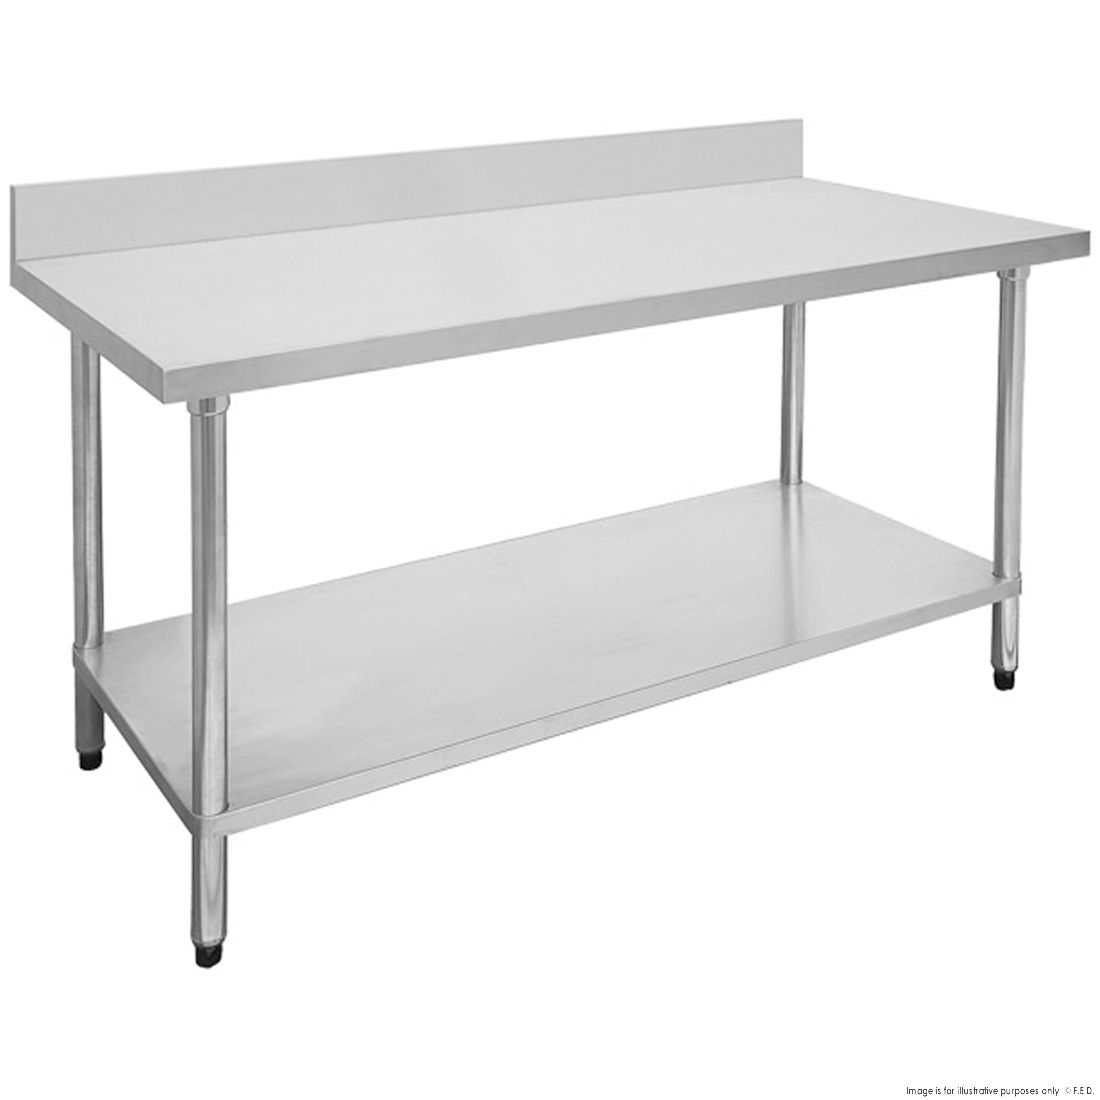 Modular Systems Economic Stainless Steel Table with splashback 300x700x900 0300-7-WBB Kitchen Benches